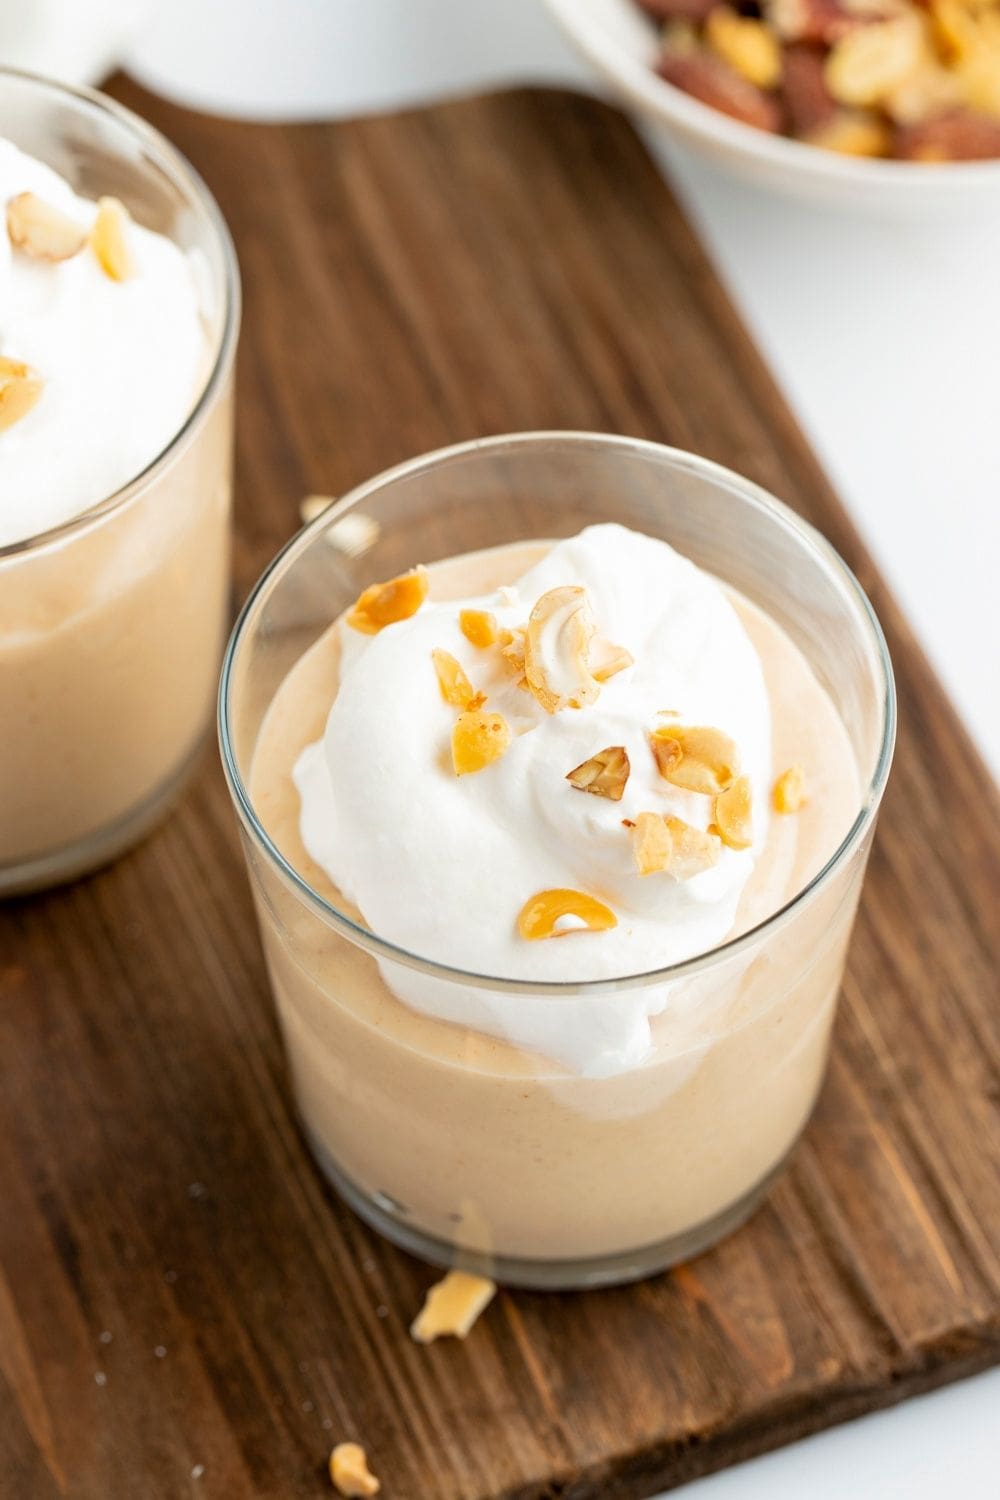 Sweet and Creamy Peanut Butter Pudding with Nuts